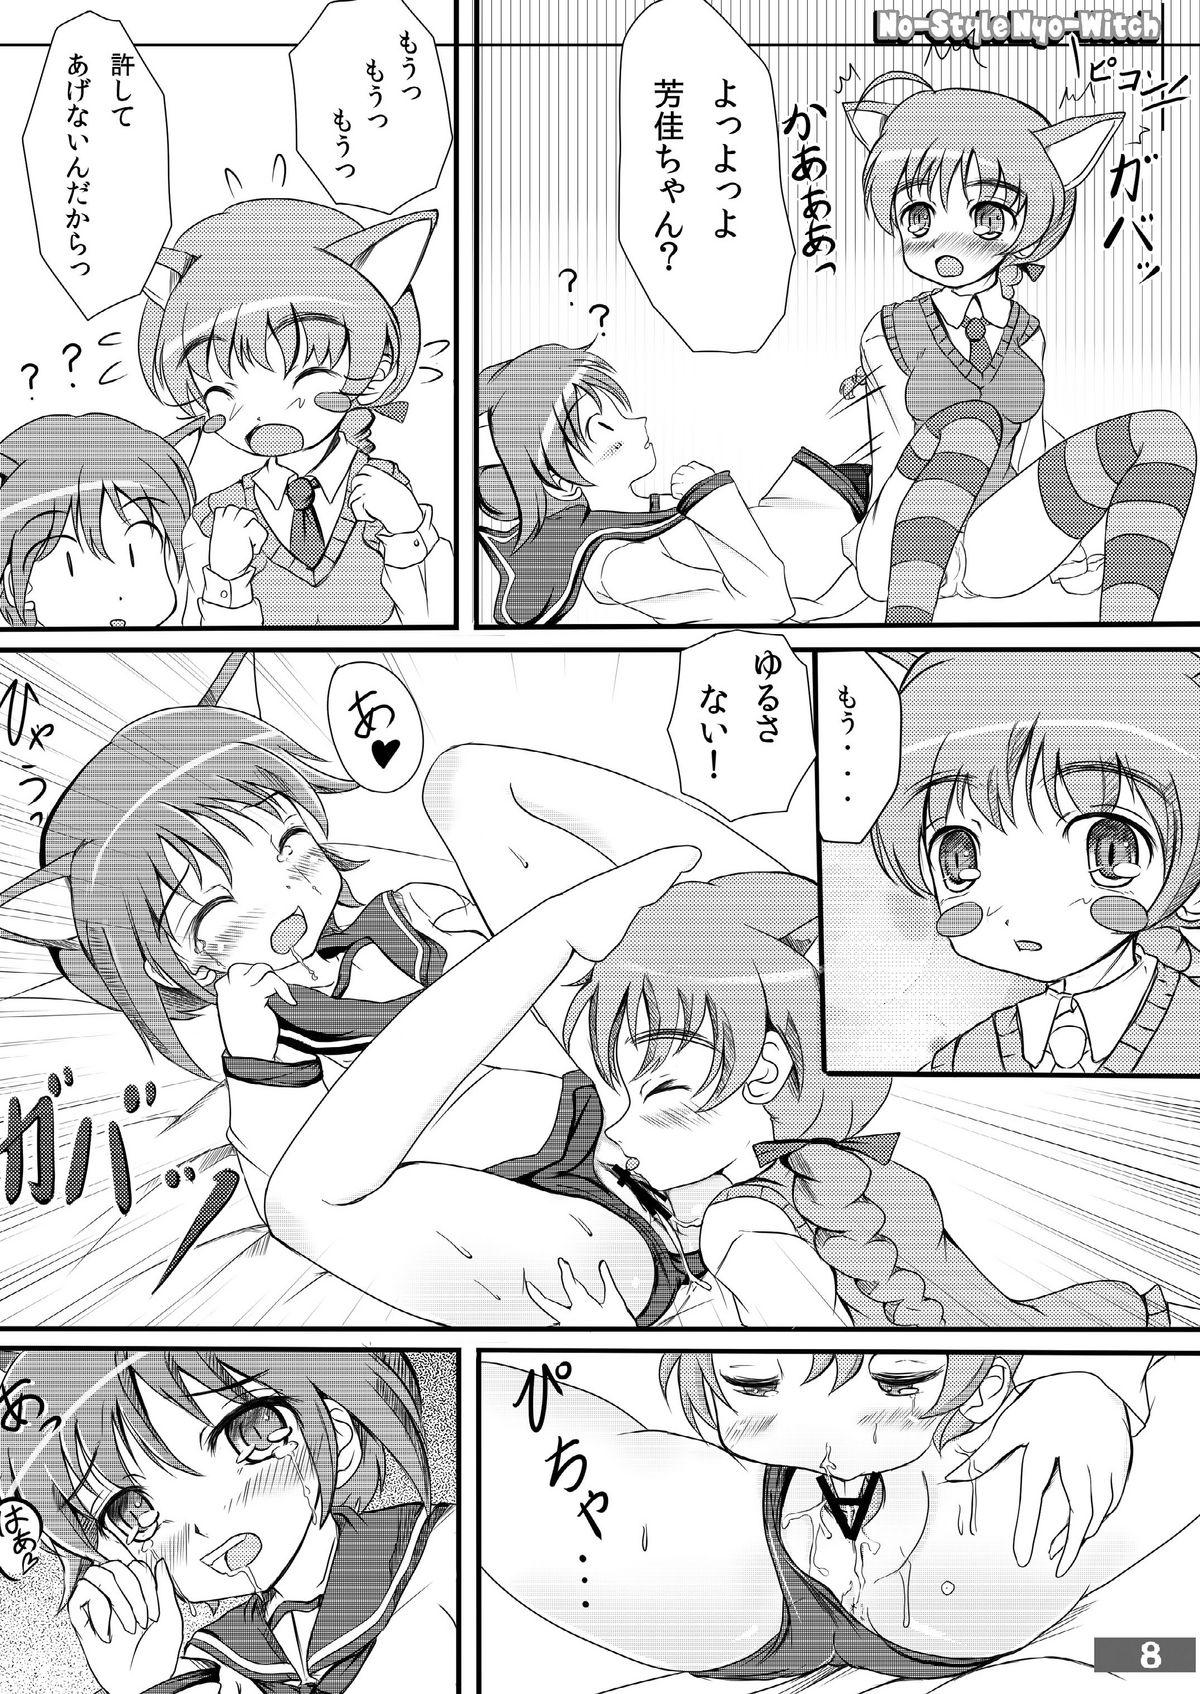 Alt (C79) [kyabe's FACTORY (Kyabe Suke)] No-Style Nyo-Witch (Strike Witches) - Strike witches Submission - Page 8